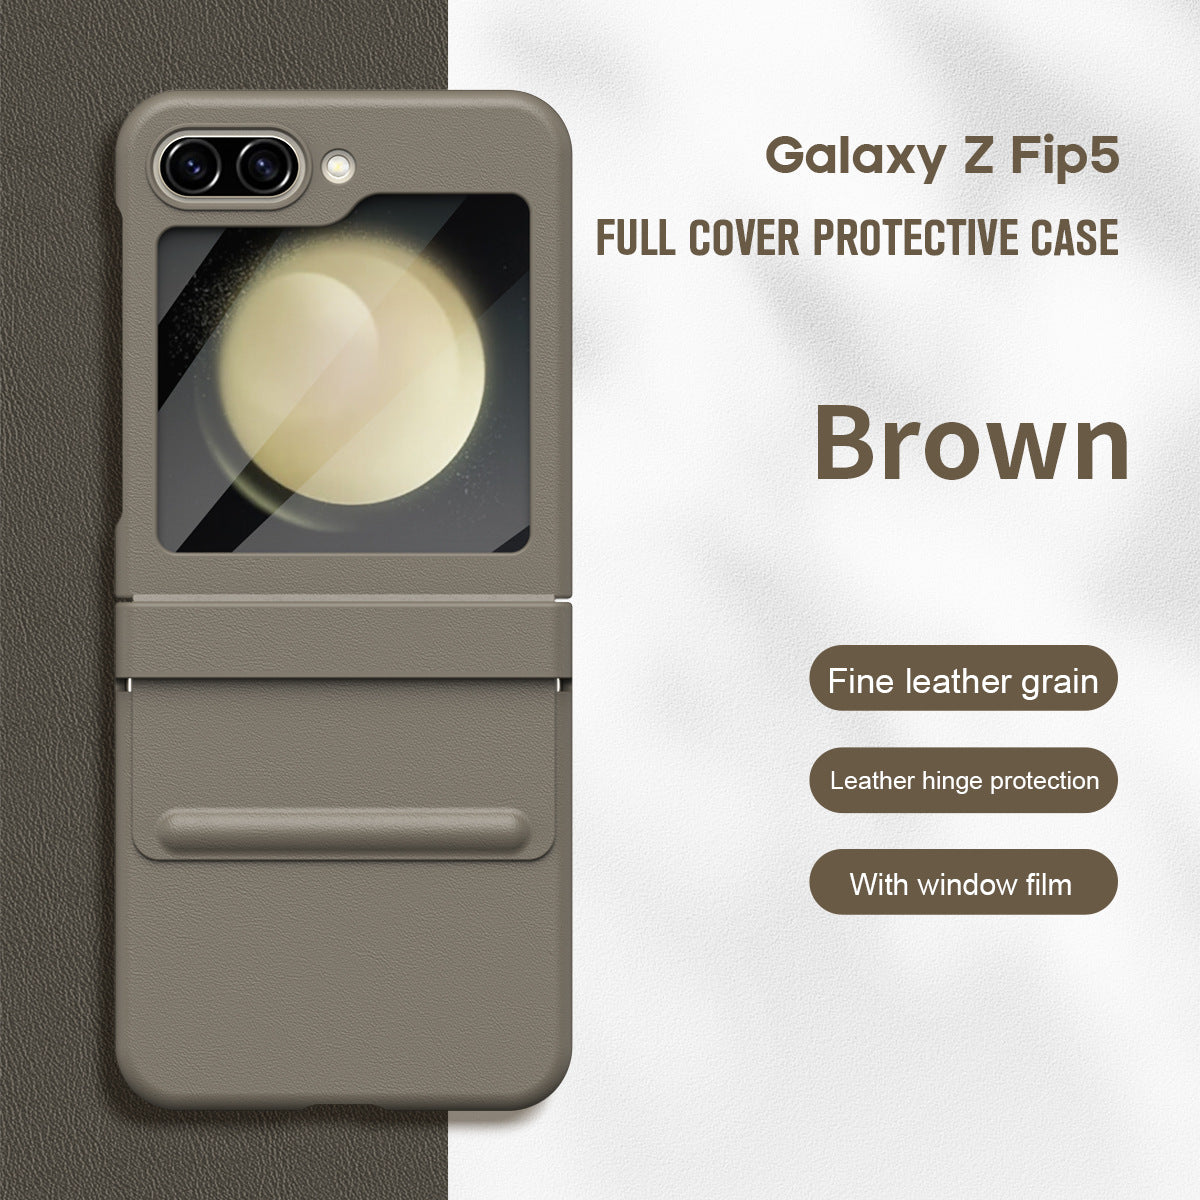 Samsung Galaxy Z Flip5 Leather Hinge Full Cover Protective Case